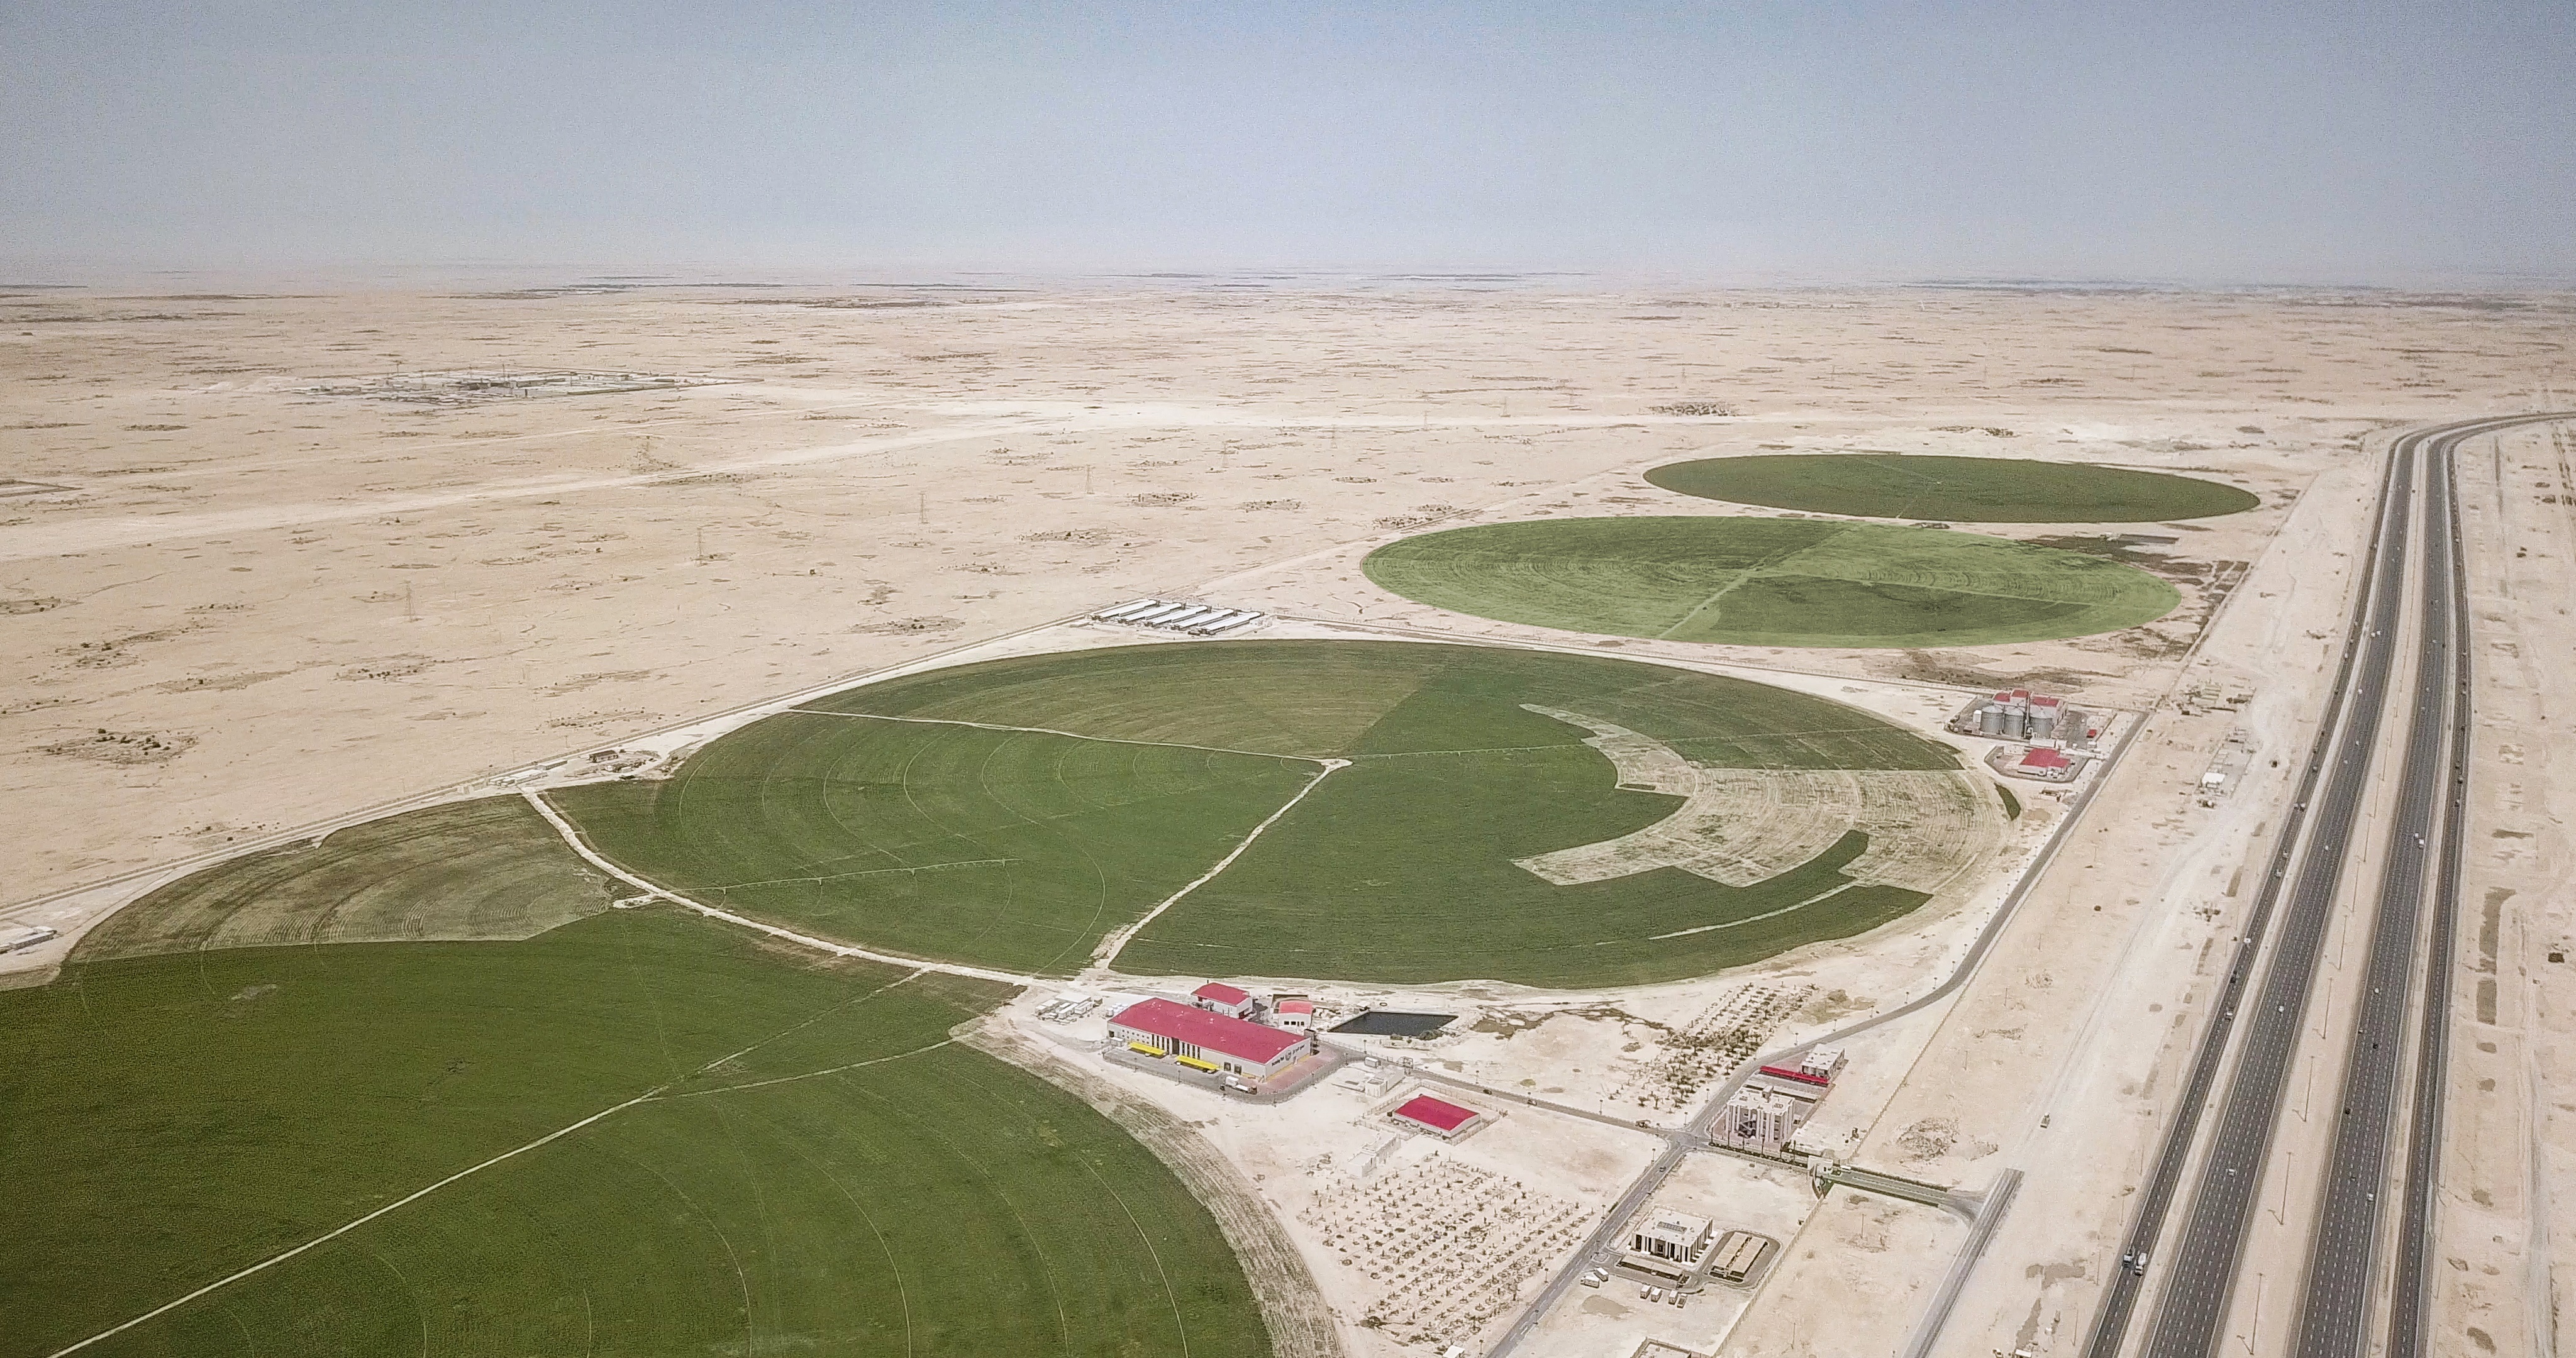 Mazzraty uses treated water to irrigate the desert land surrounding the poultry processing plant in Qatar